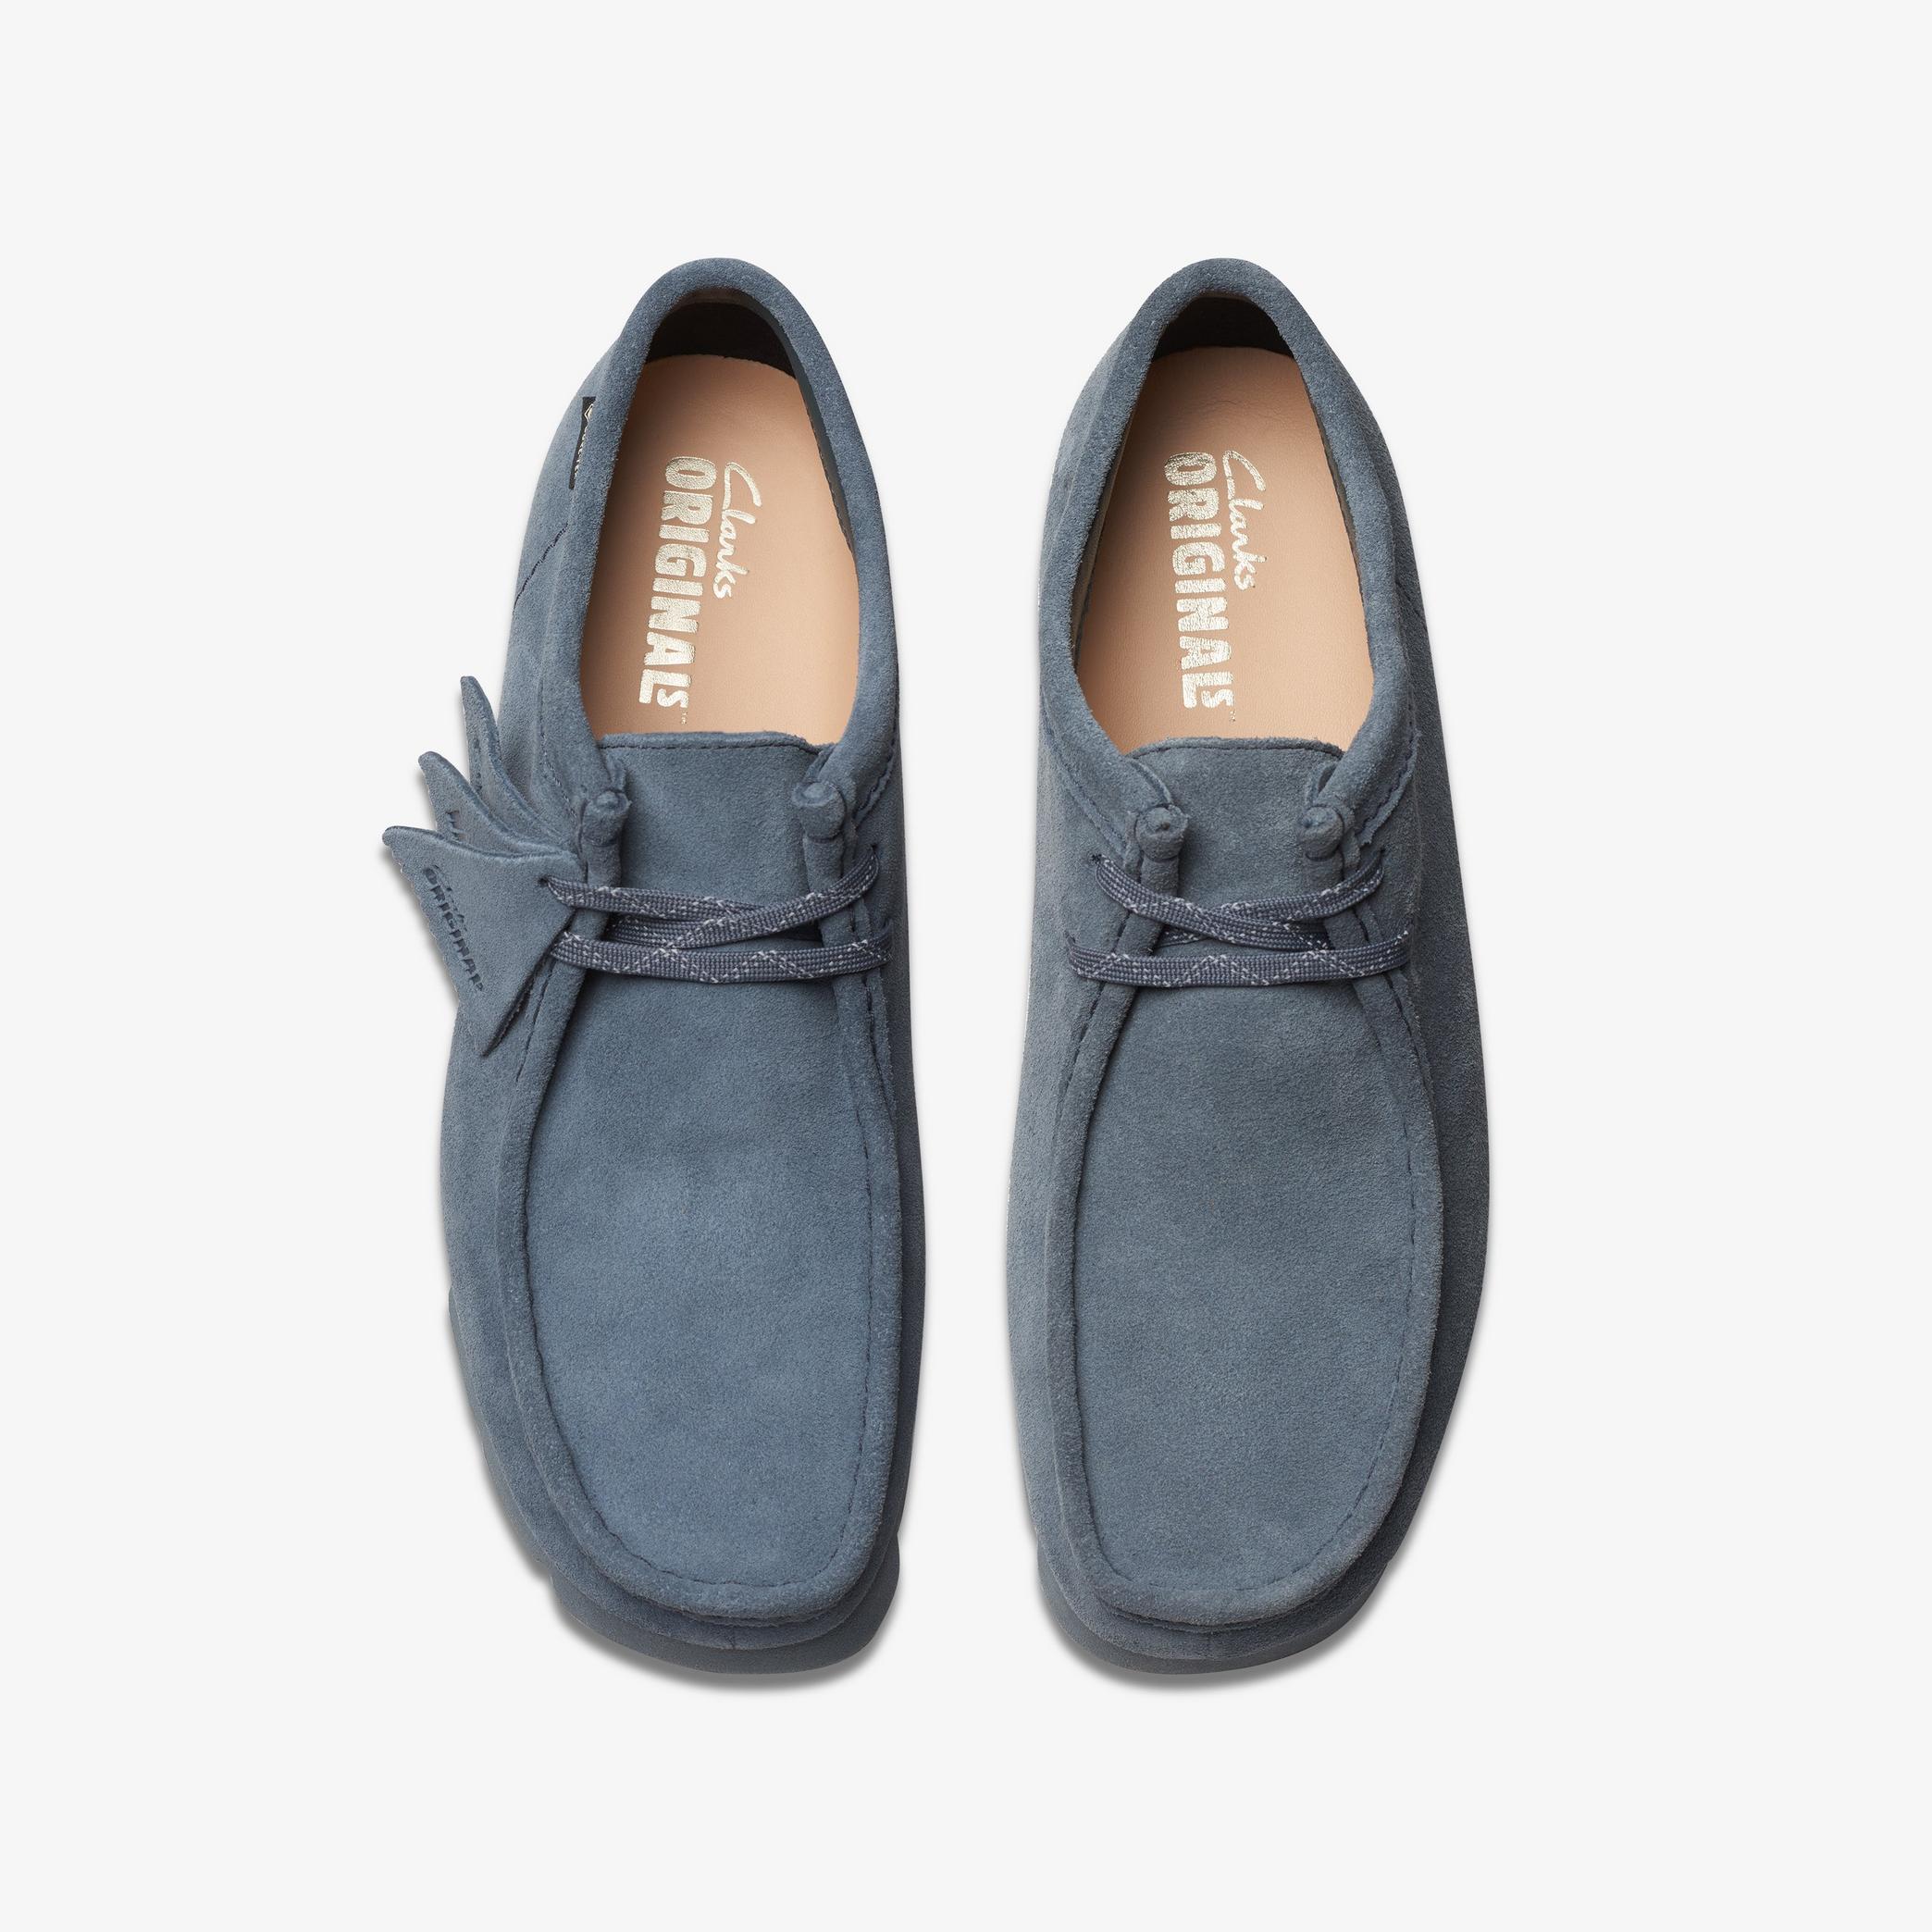 Wallabee GORE-TEX Blue/Grey Suede Shoes, view 6 of 7